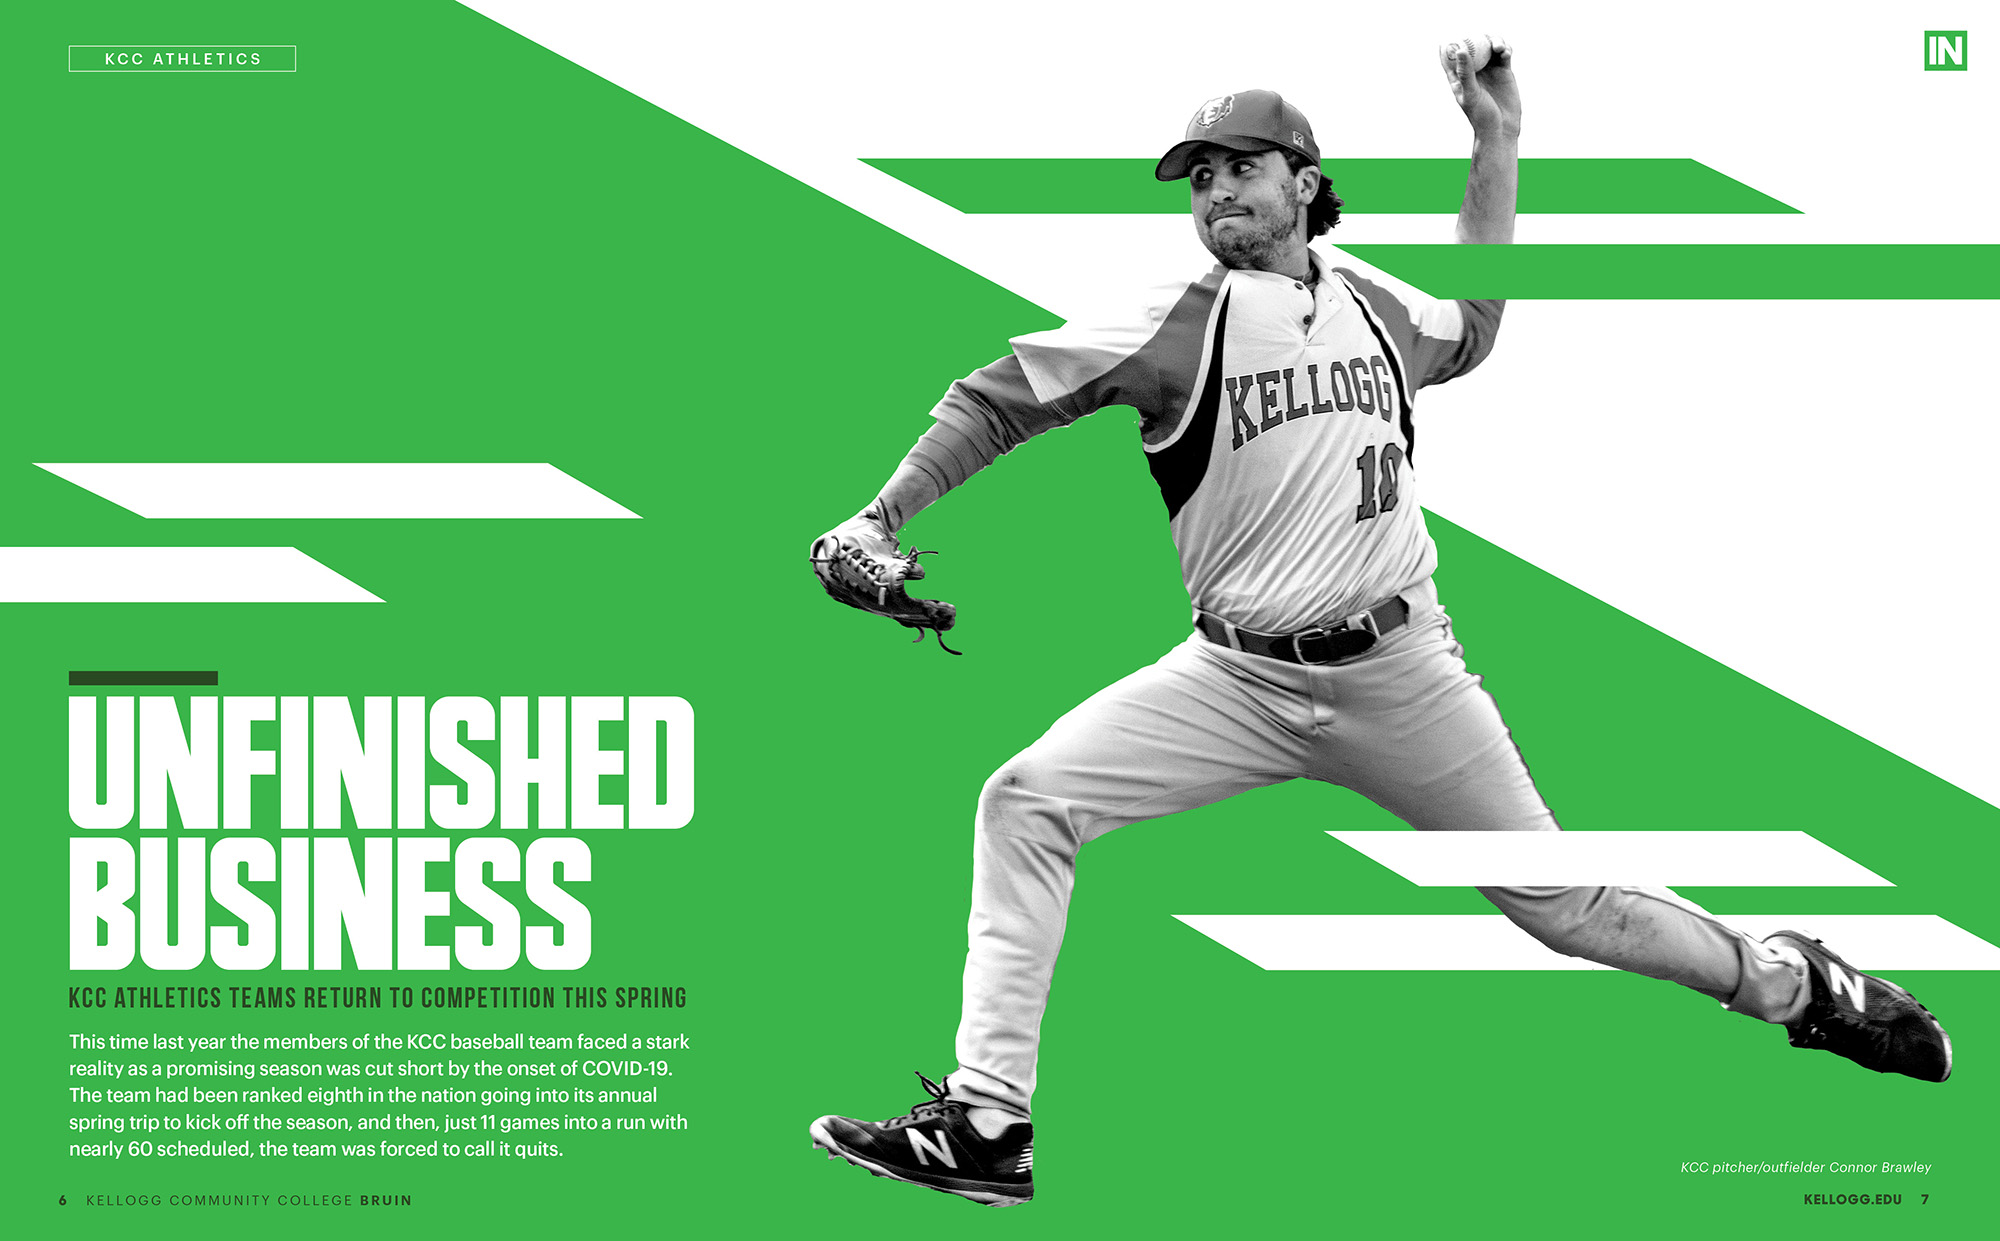 A stylize image of a KCC pitcher on a green background, with text that reads "Unfinished Business."